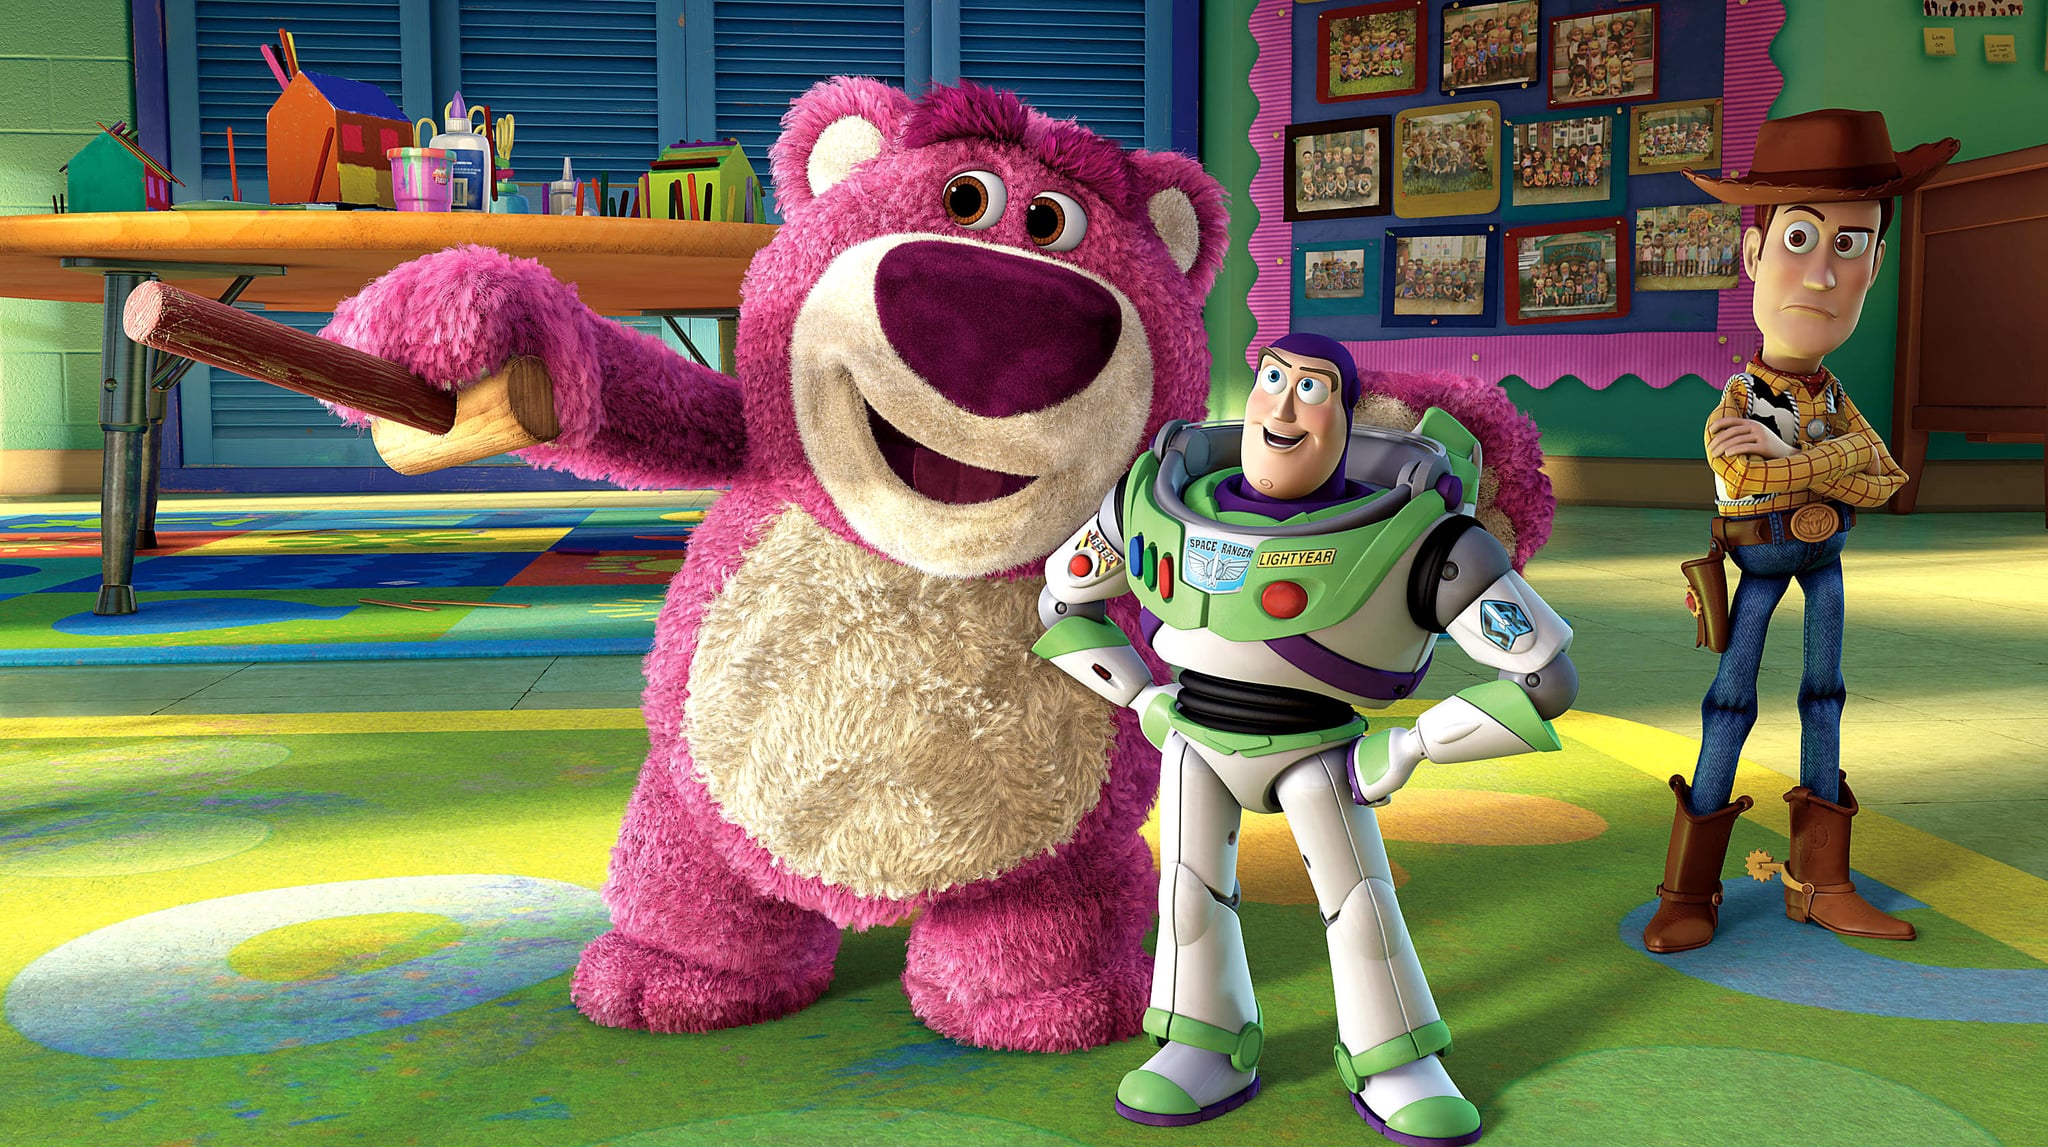 TOY STORY 3, from left: Lotso (voice: Ned Beatty), Buzz Lightyear (voice: Tim Allen), Woody (voice: Tom Hanks), 2010. Buena Vista Pictures/courtesy Everett Collection